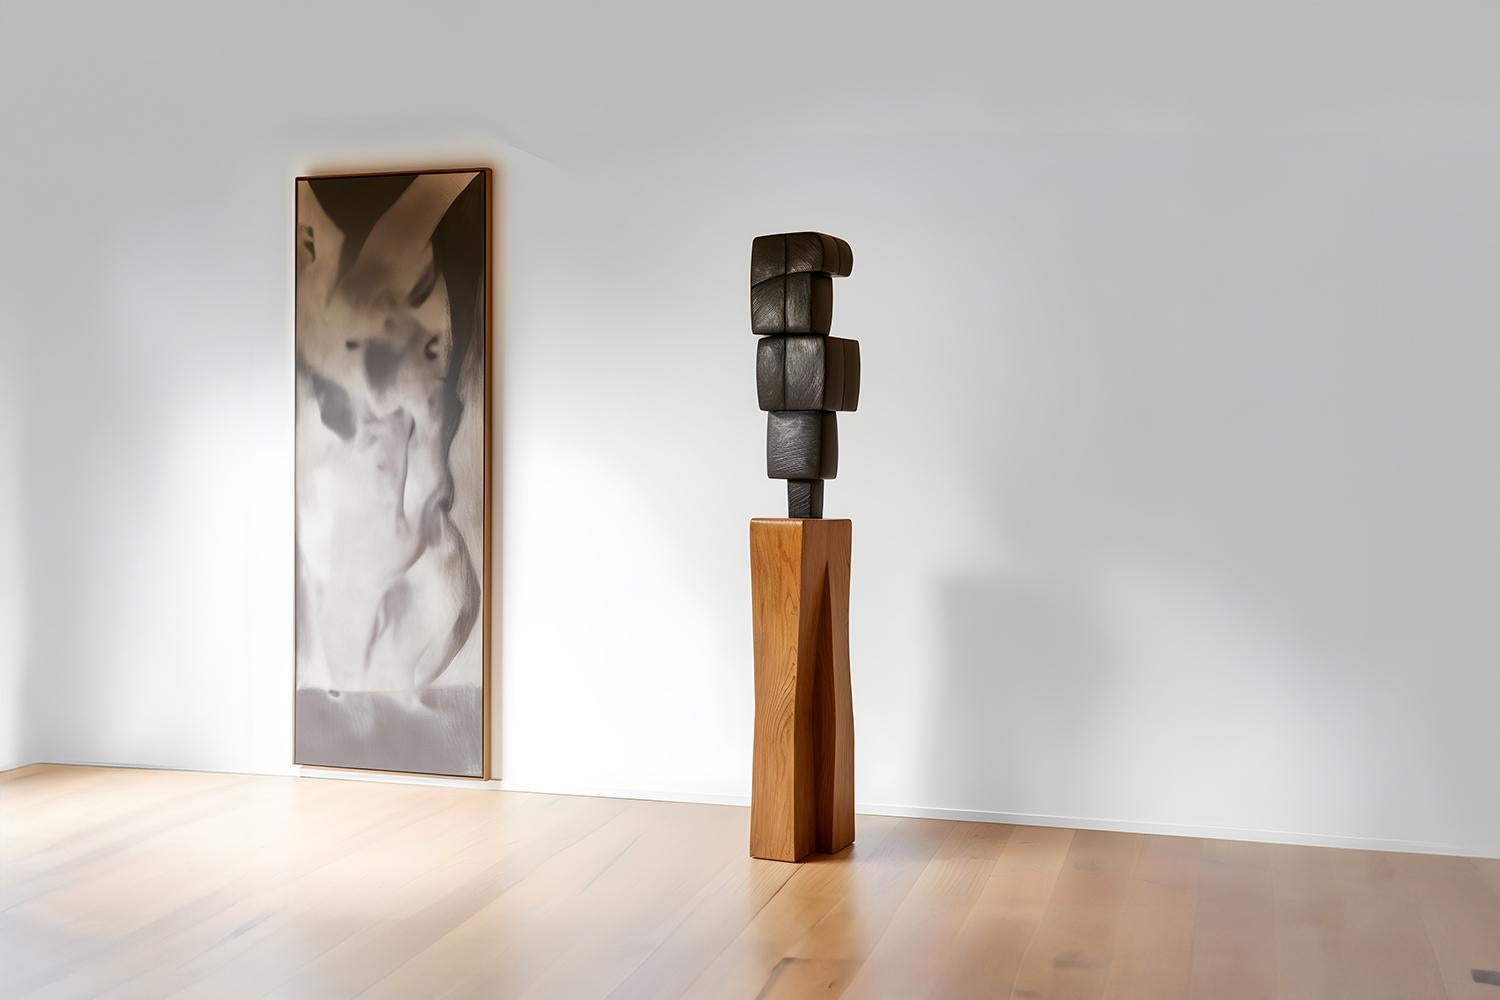 Monumental Wooden Sculpture Inspired in Constantin Brancusi Style, Unseen Force 25 by Joel Escalona


This monolithic sculpture, designed by the talented Artist Joel Escalona, is a towering example of beauty in craftsmanship. Hand and digital